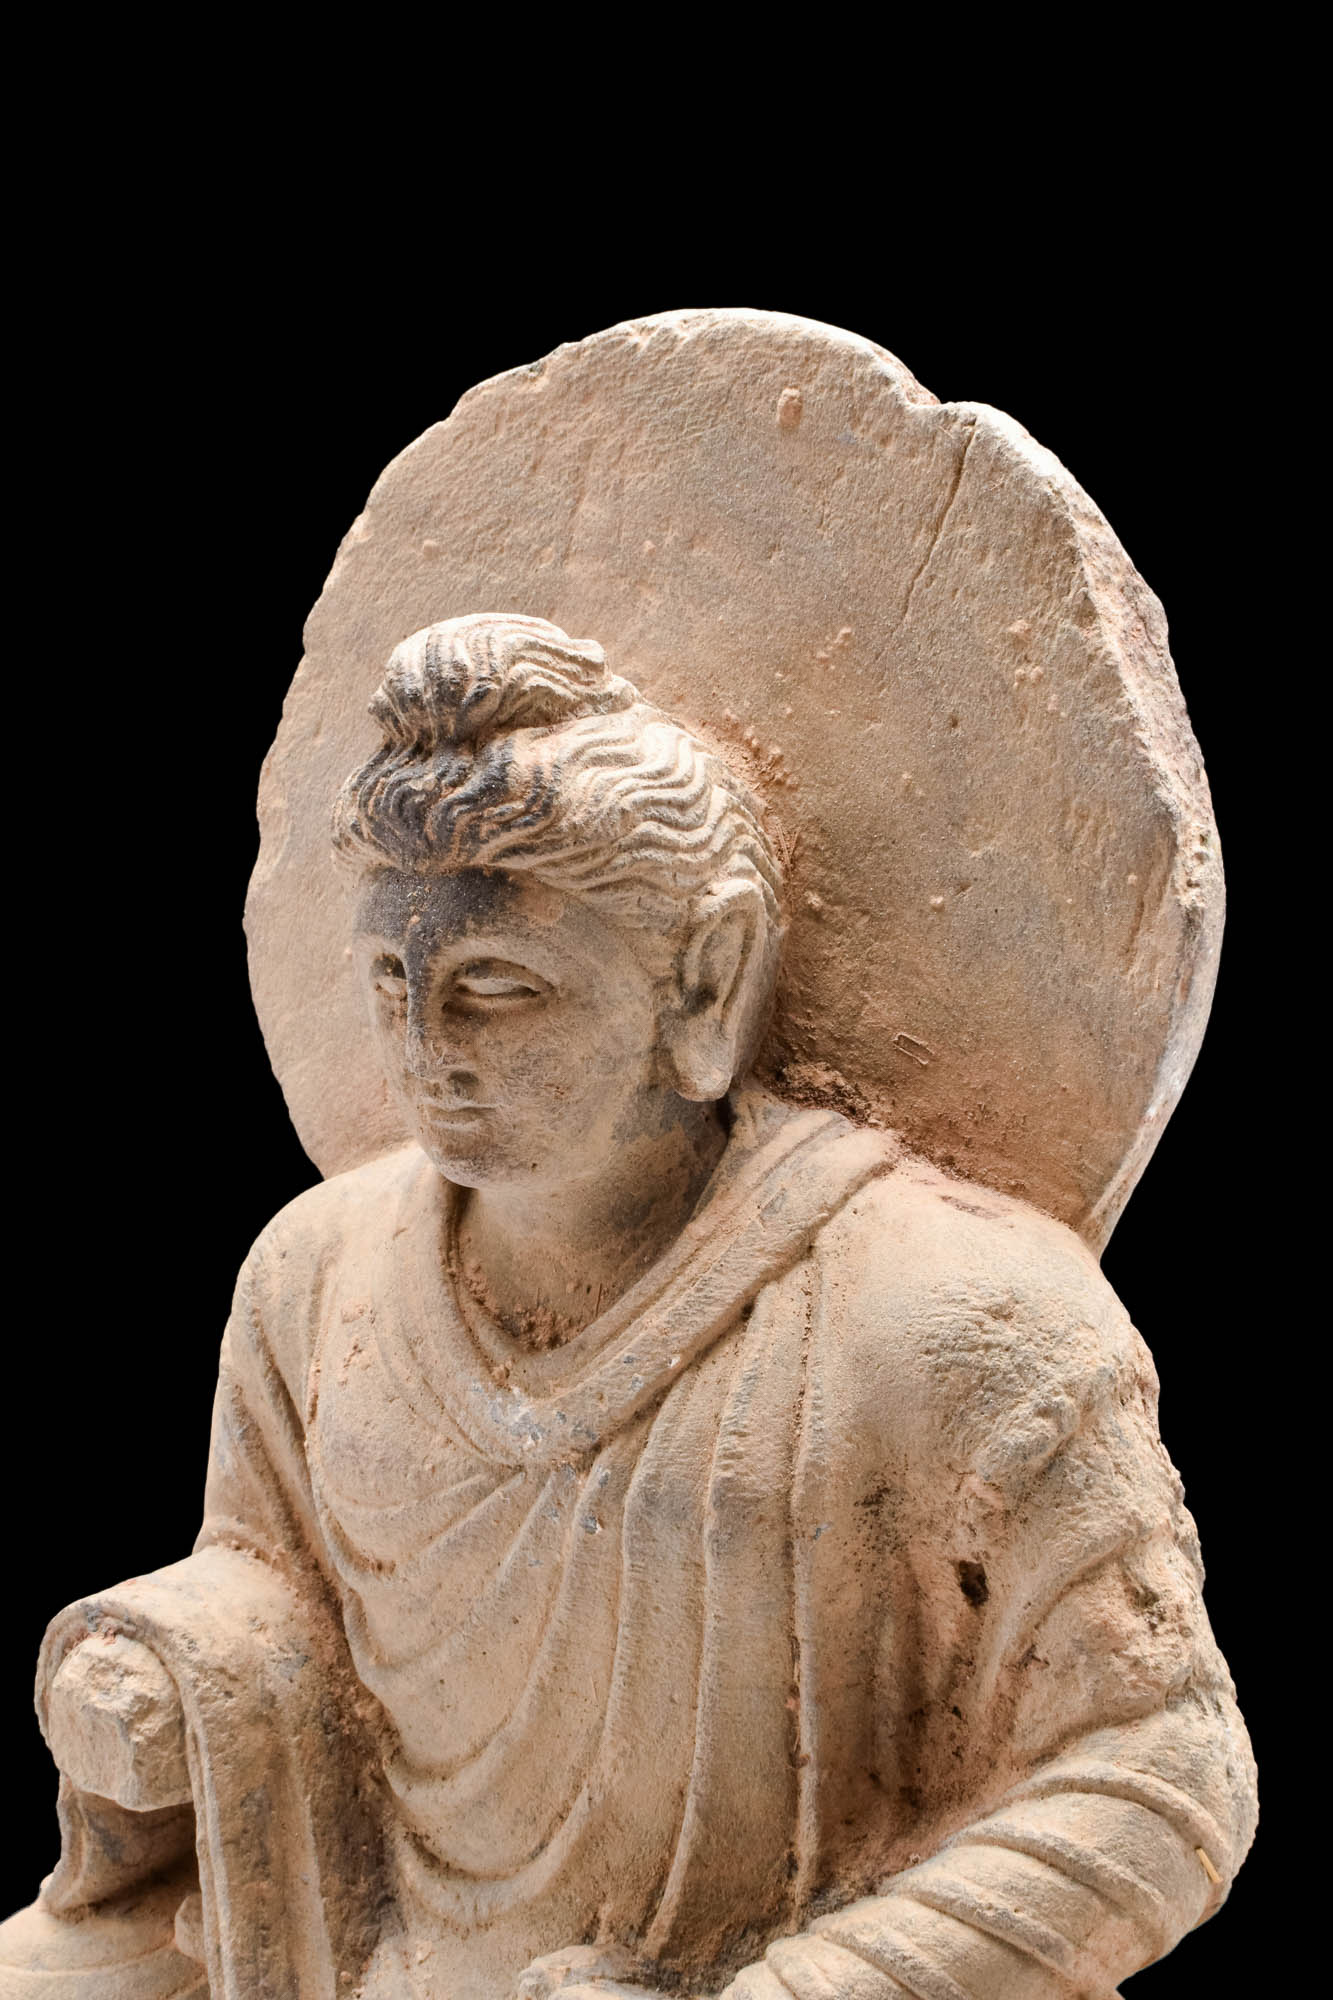 GANDHARAN GRAY SCHIST FIGURE OF A SEATED BUDDHA - Image 4 of 6